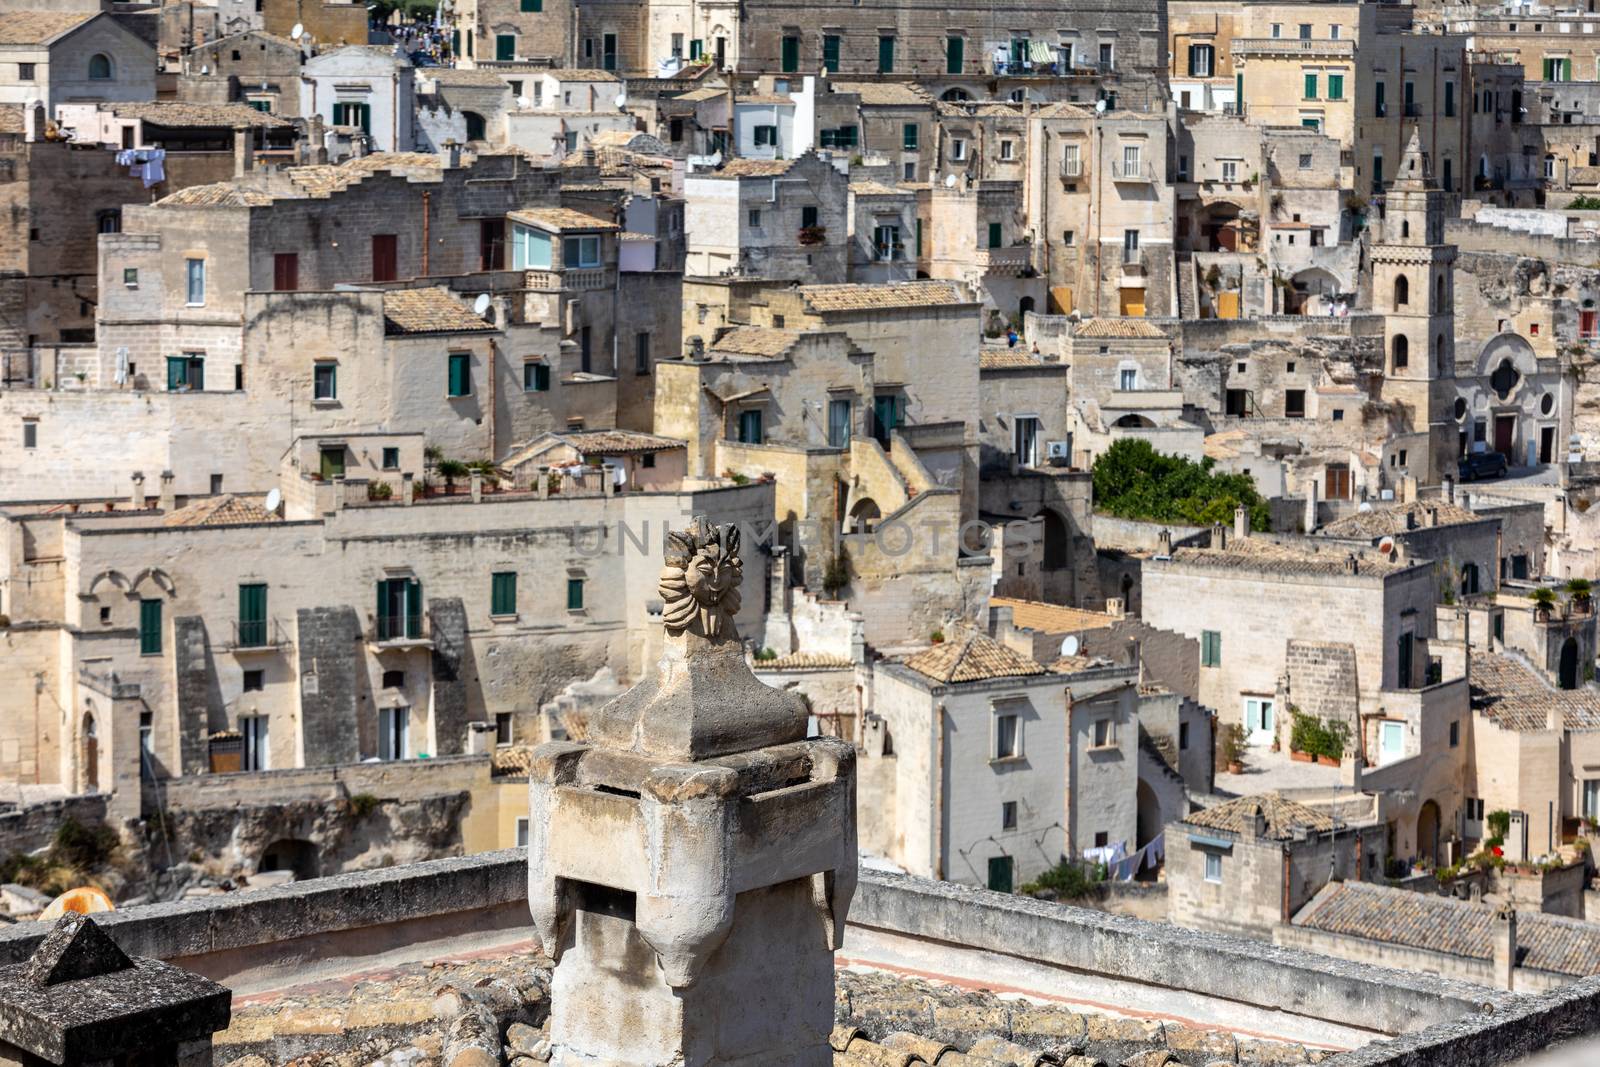 View of the Sassi di Matera a historic district in the city of Matera, Basilicata. Italy by wjarek